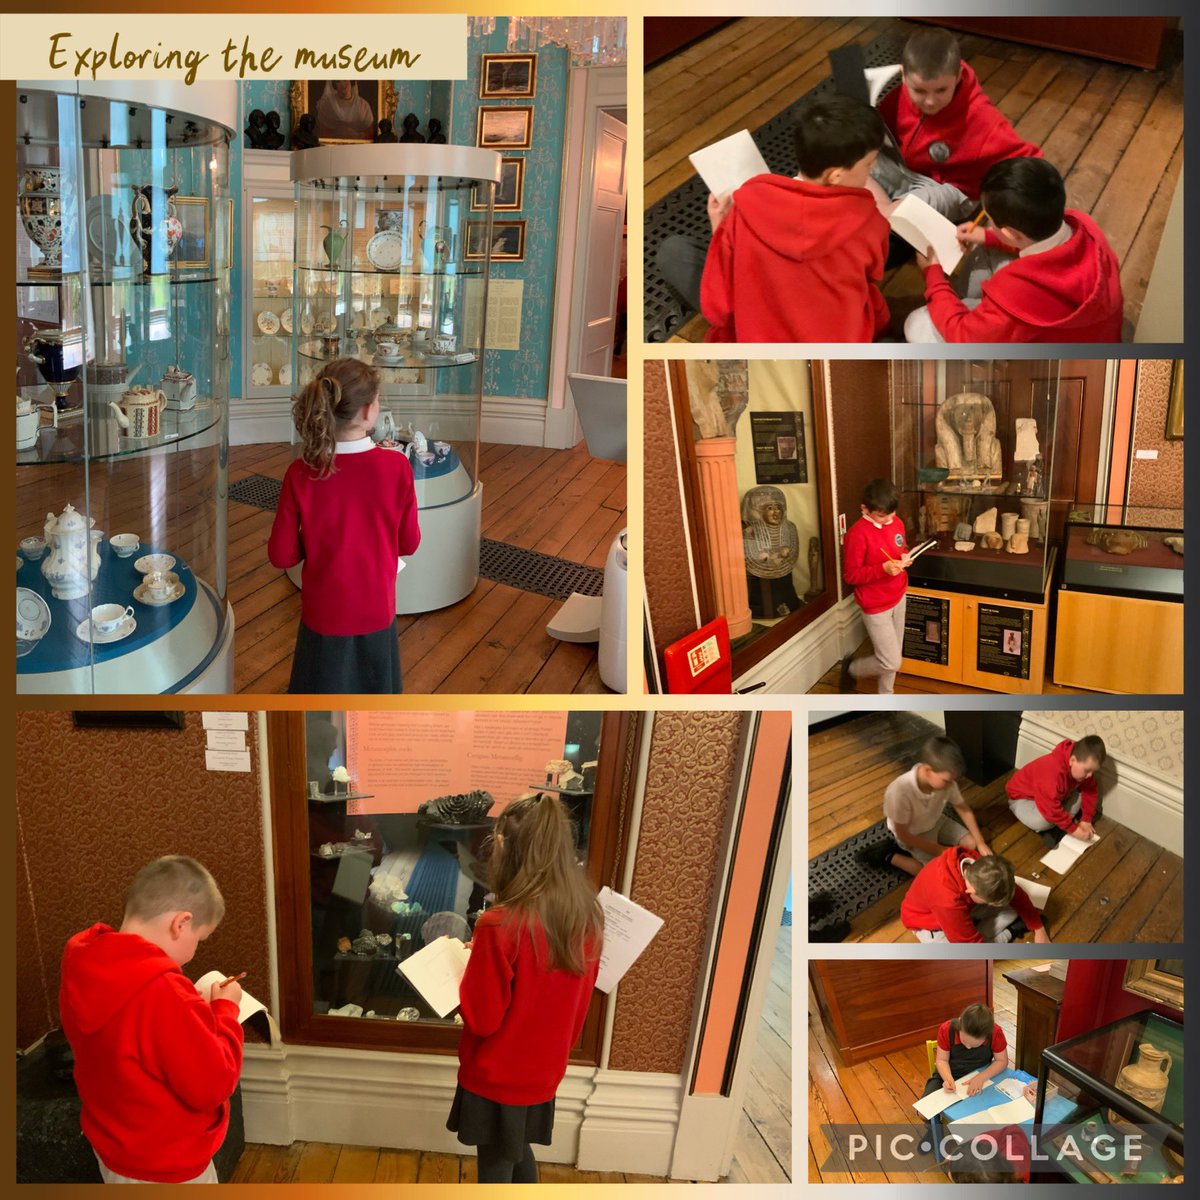 Thank you to @VisitCyfarthfa for an amazing day exploring the artefacts and history of Cyfarthfa Museum. What a fascinating day 🤩 @CscHumanities